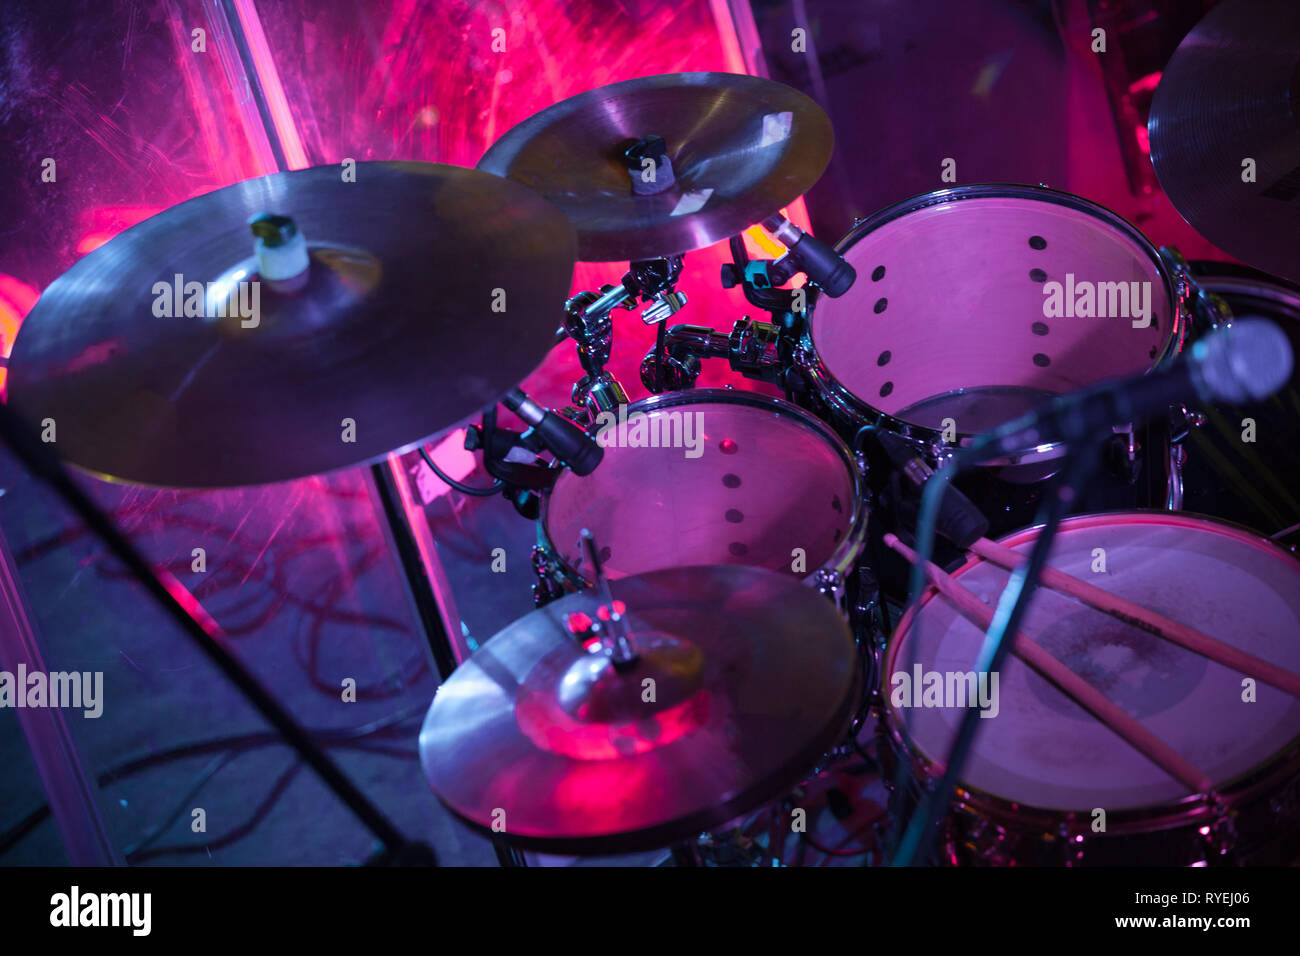 Rock music background with drum set in purple stage lights, close-up photo, soft selective focus Stock Photo